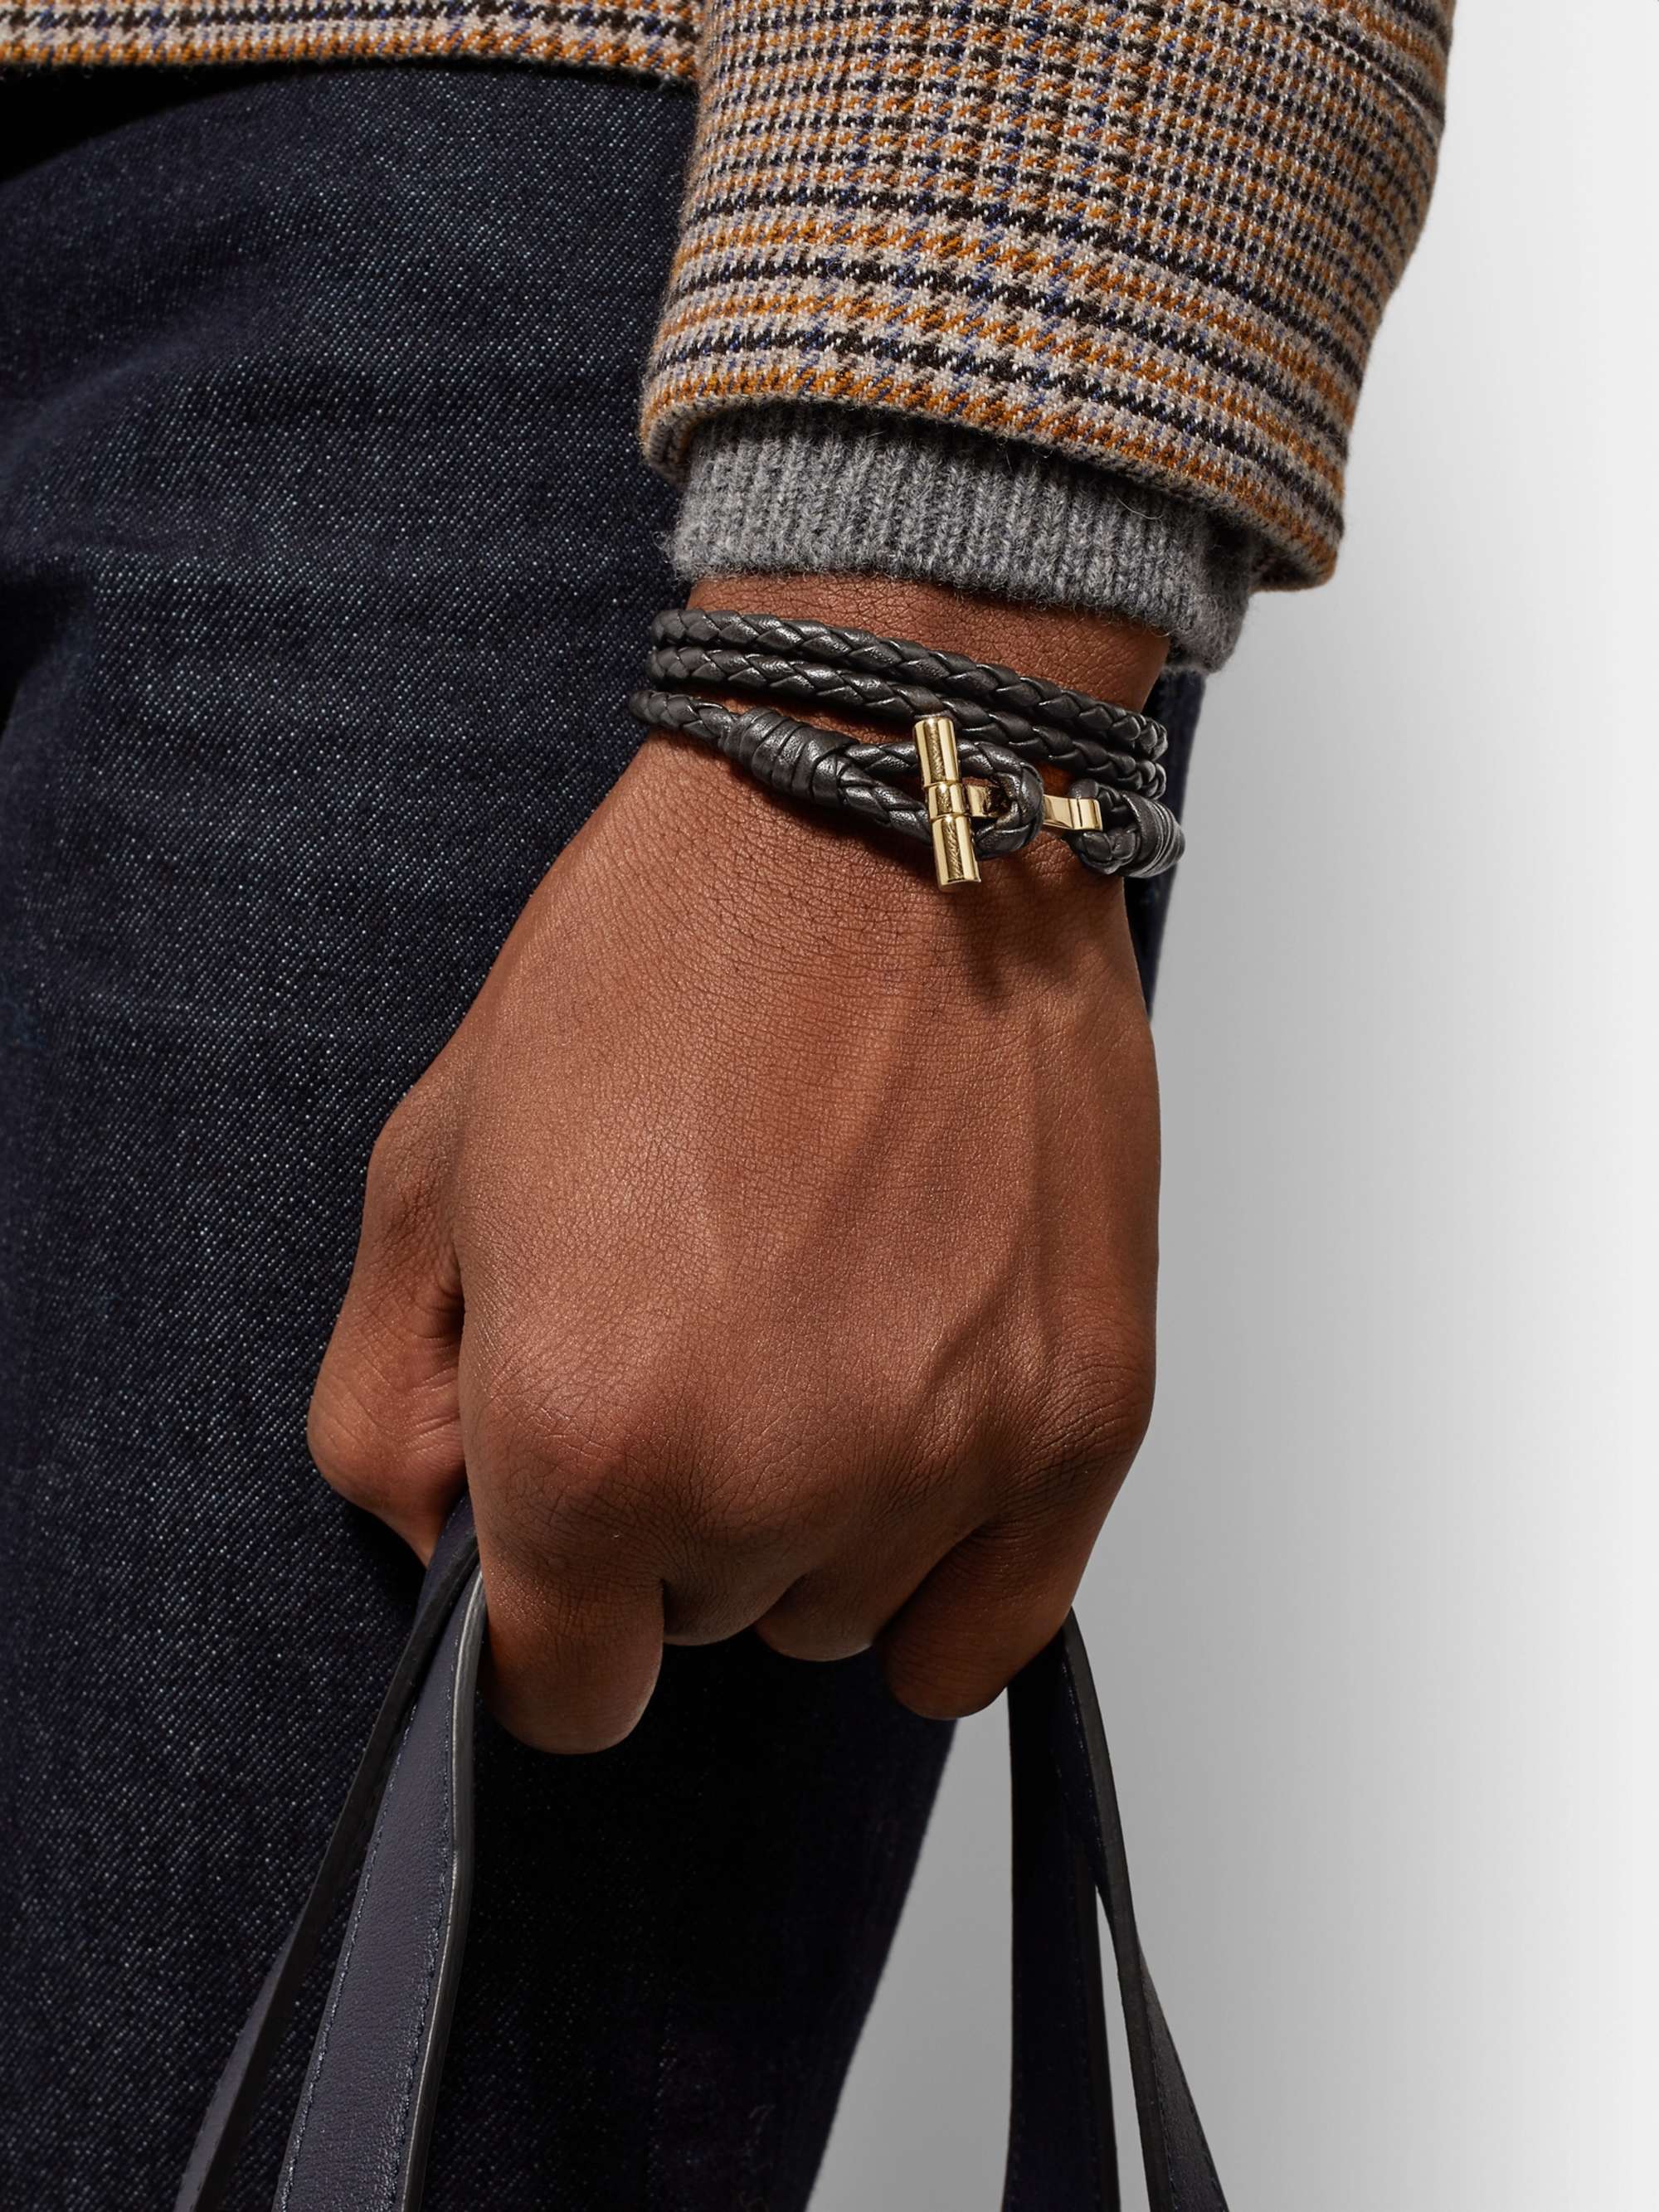 TOM FORD Woven Leather and Silver-Tone Wrap Bracelet